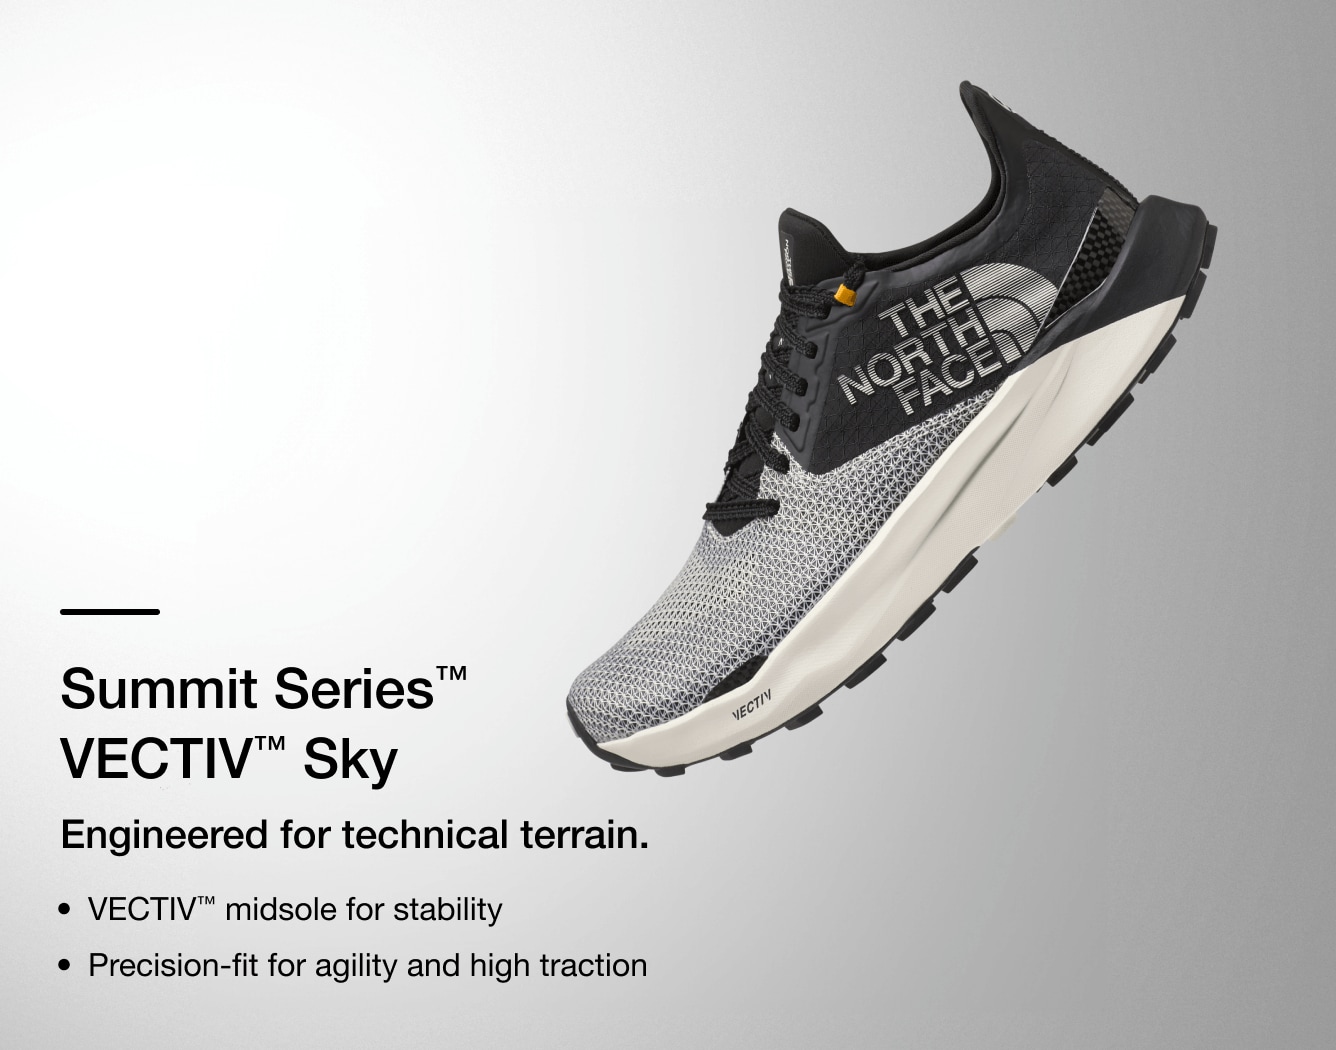 Studio shot of the VECTIV Sky trail running shoe from The North Face with text overlay detailing features.